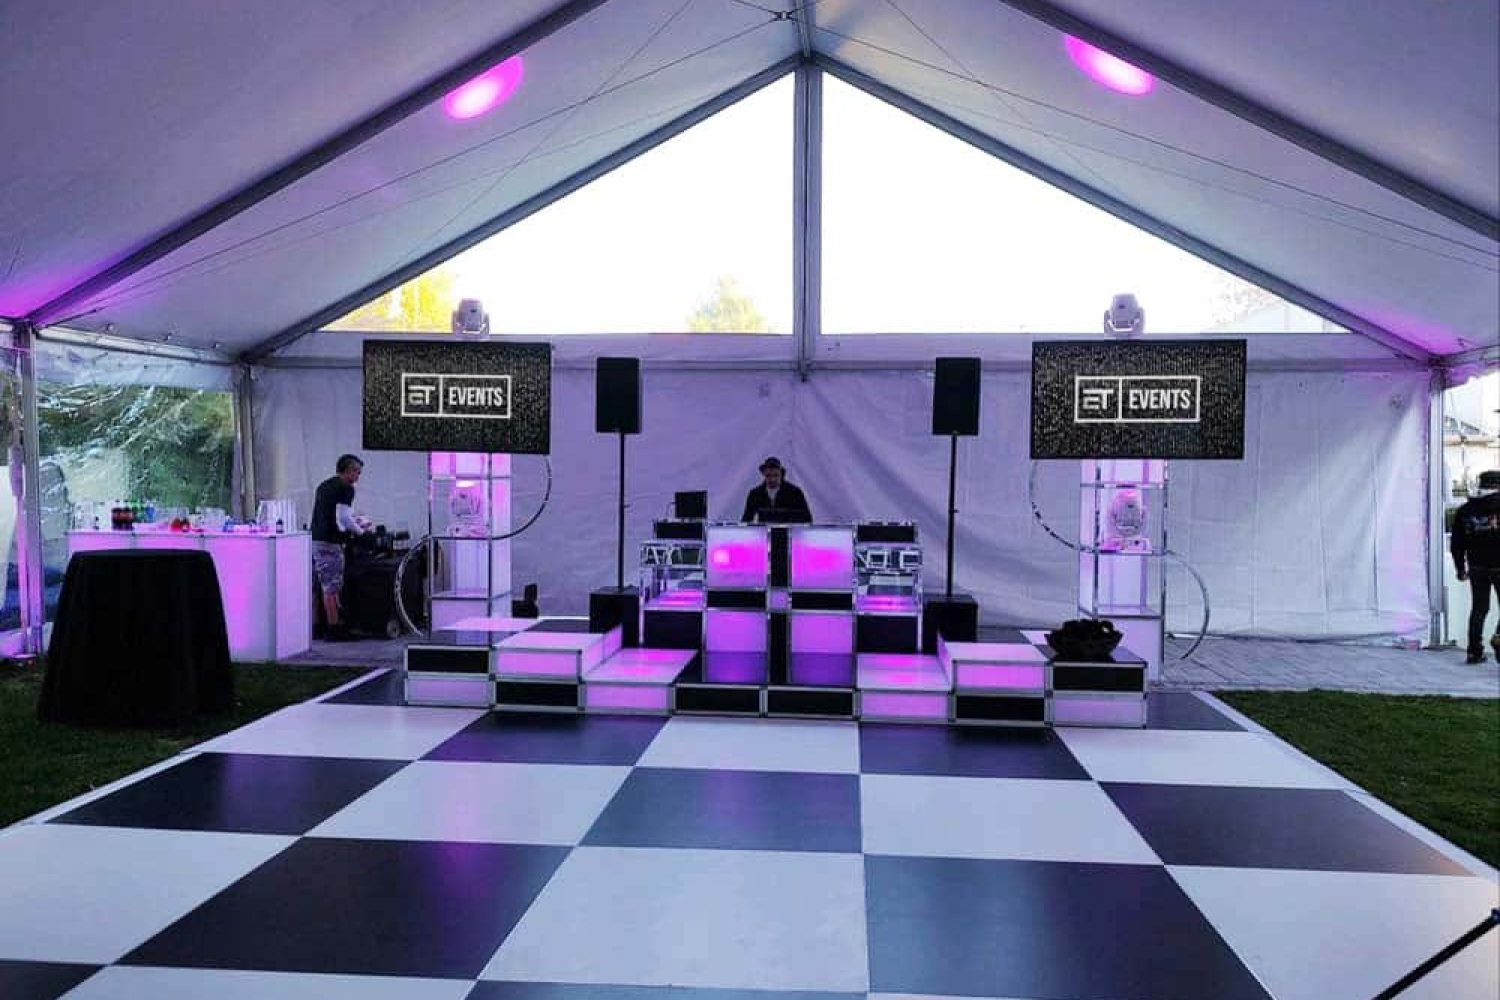 Black and White Dance Floor ith DJ Booth